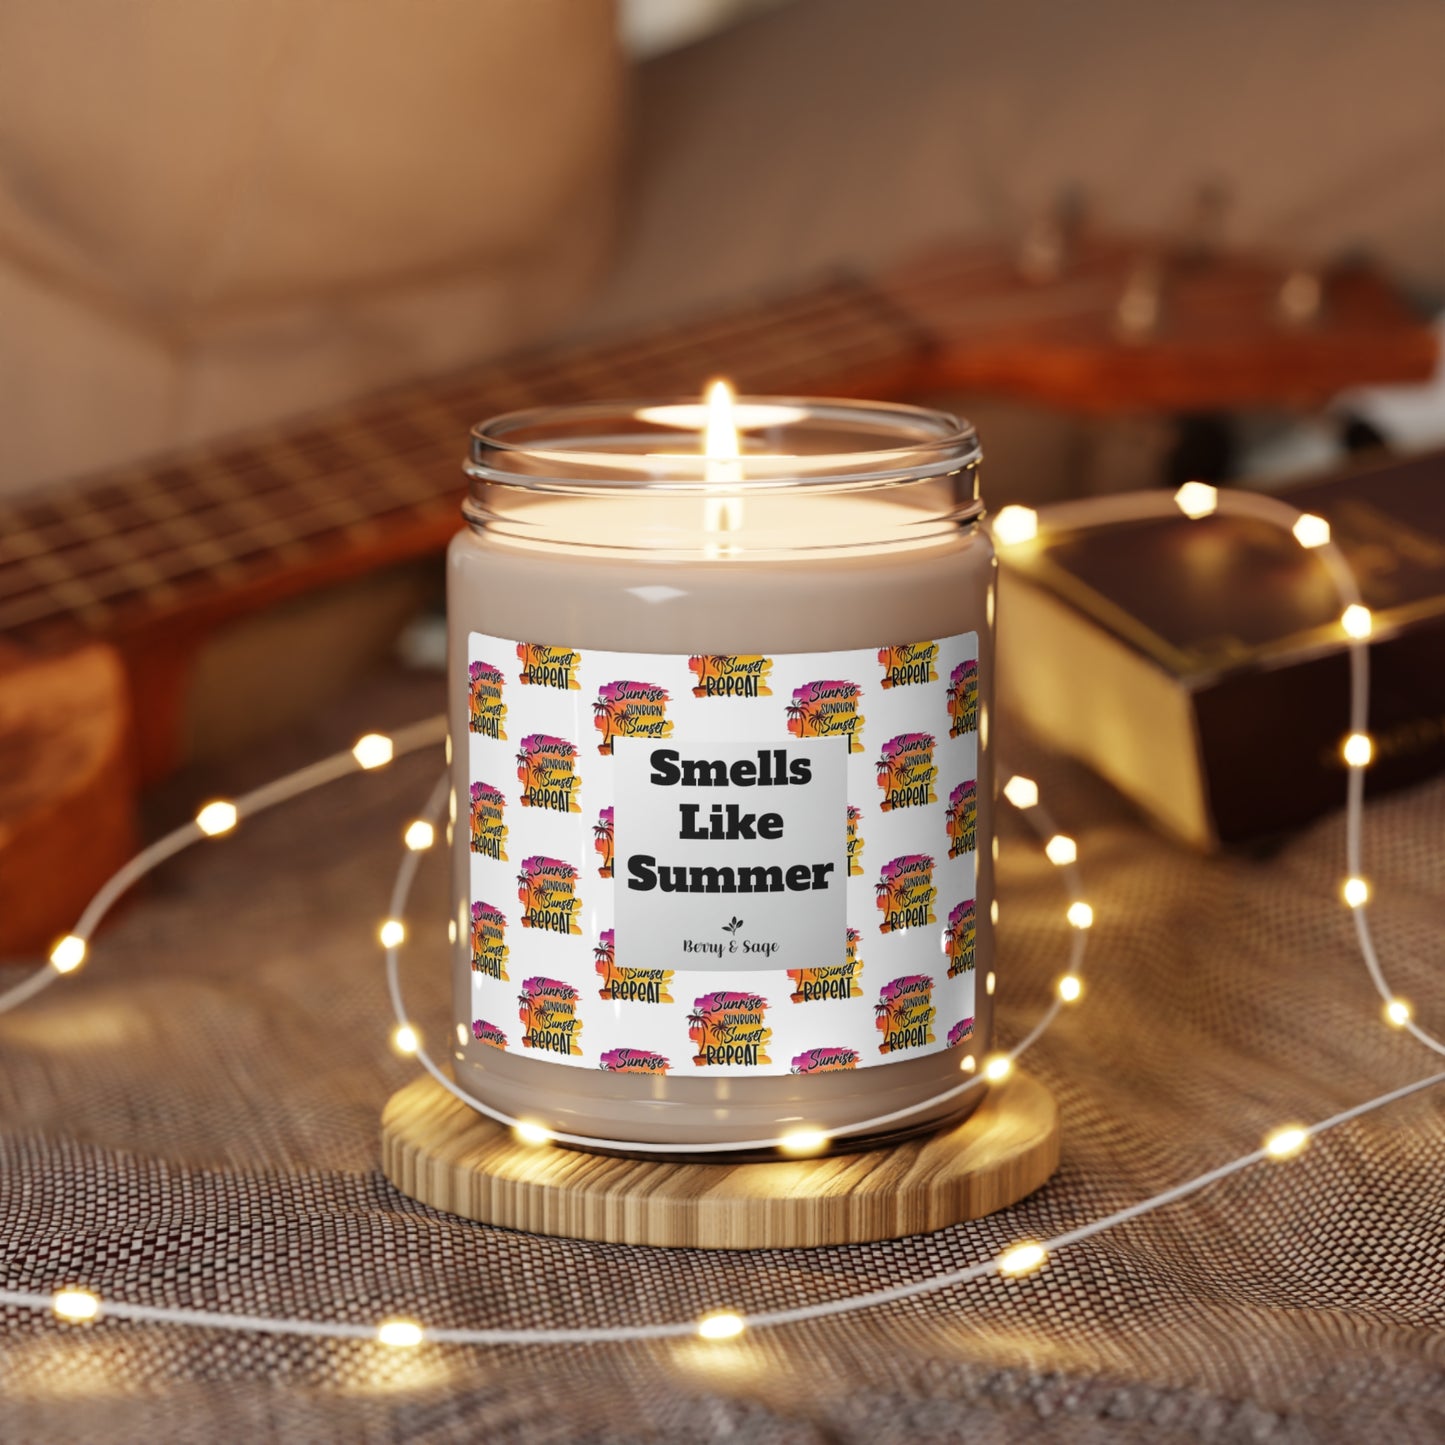 Smells Like Summer Scented Soy Candle, 9oz